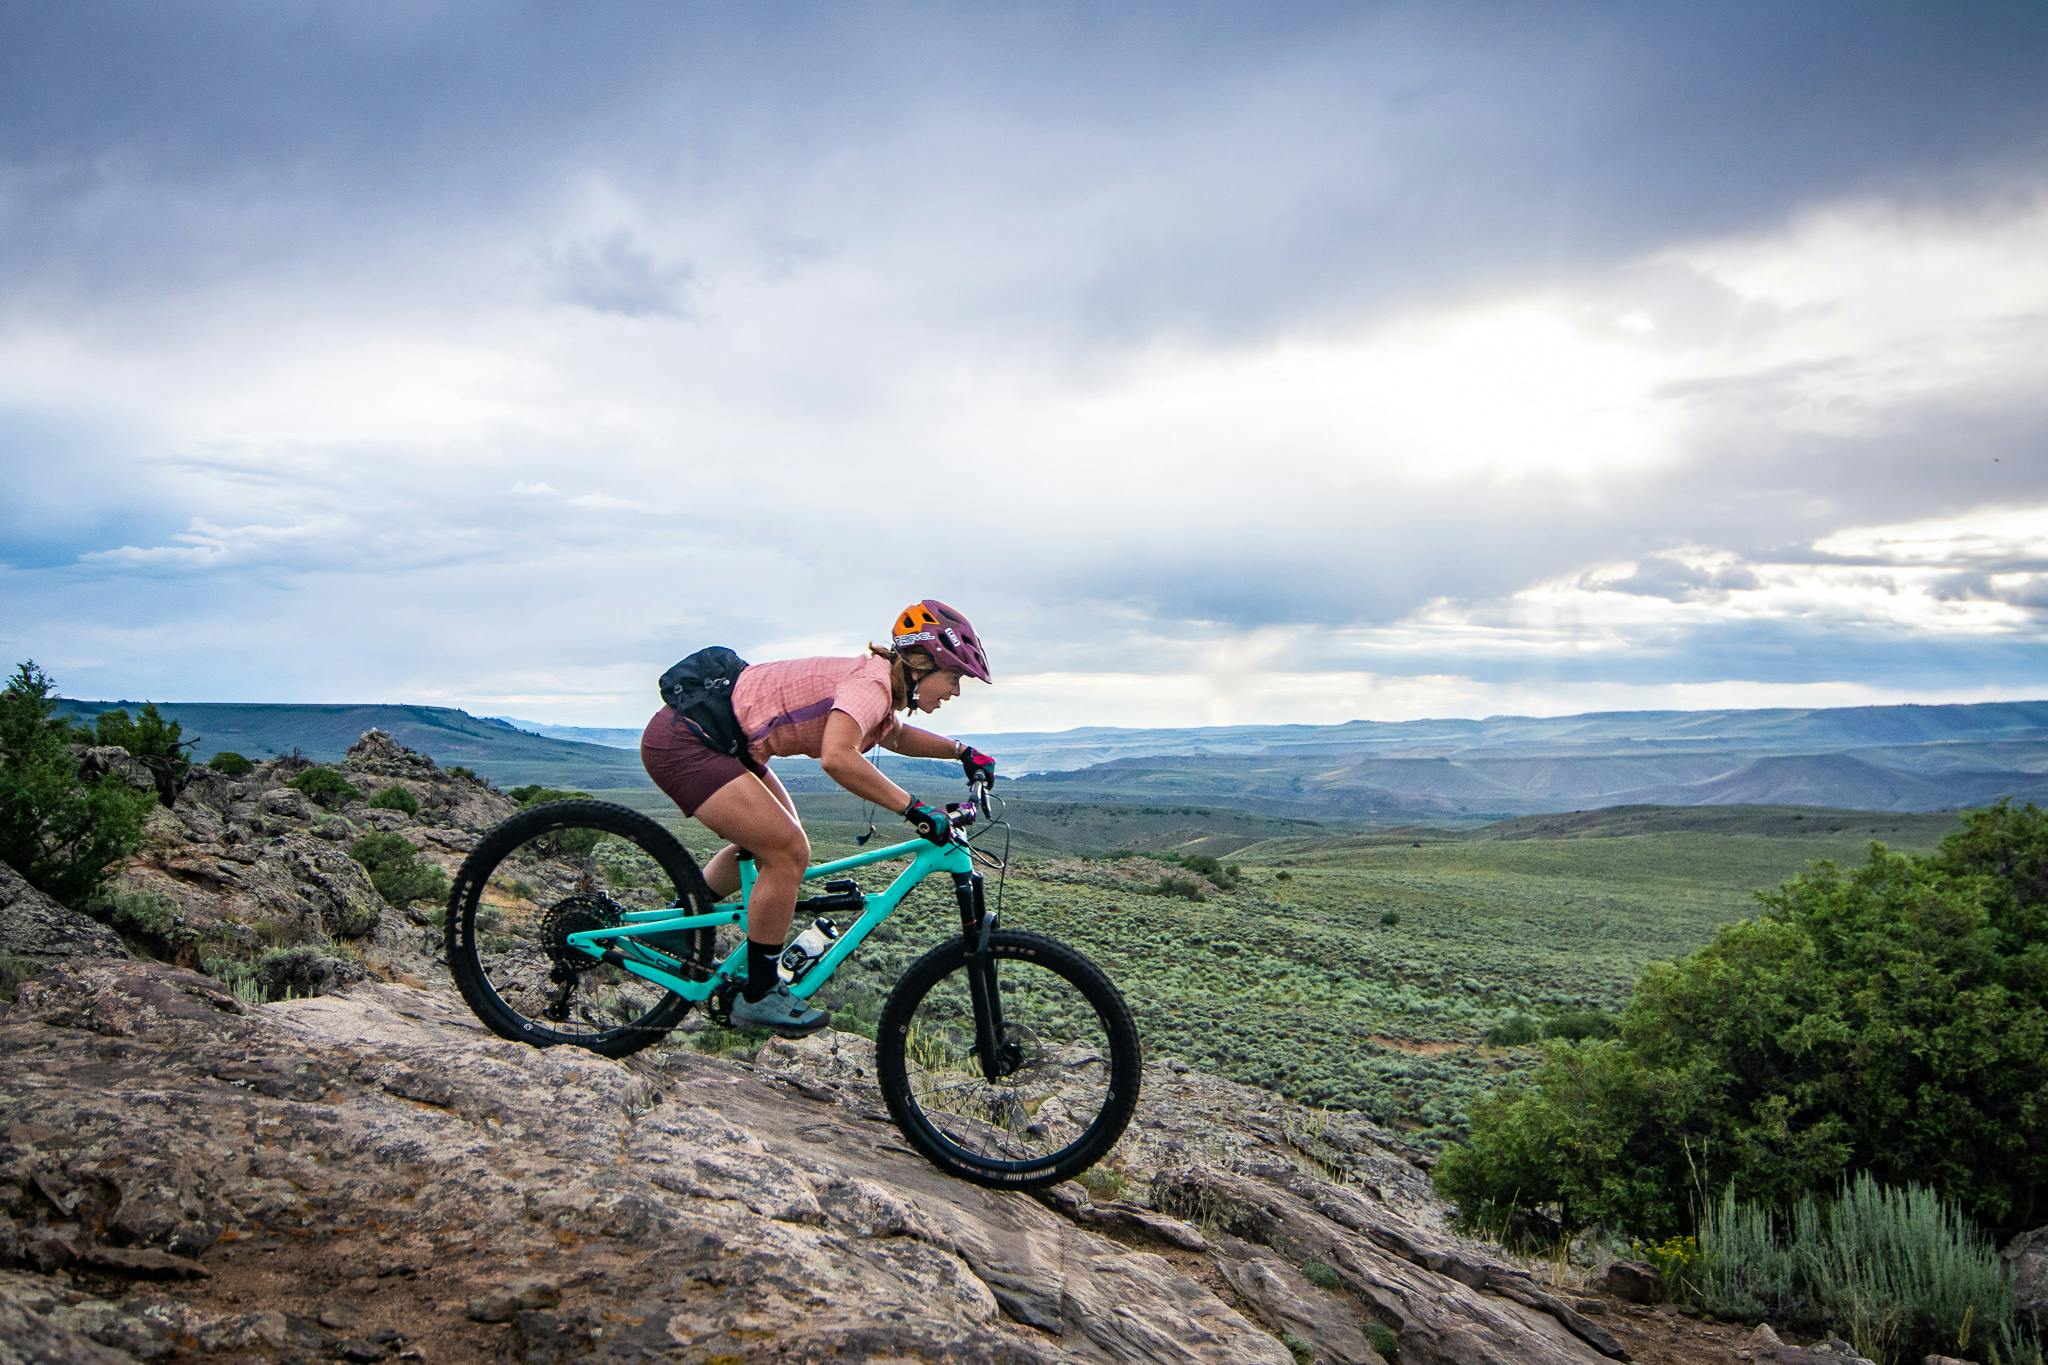 A woman mountain biking down a rocky slope with an expansive view of hills in the distance.